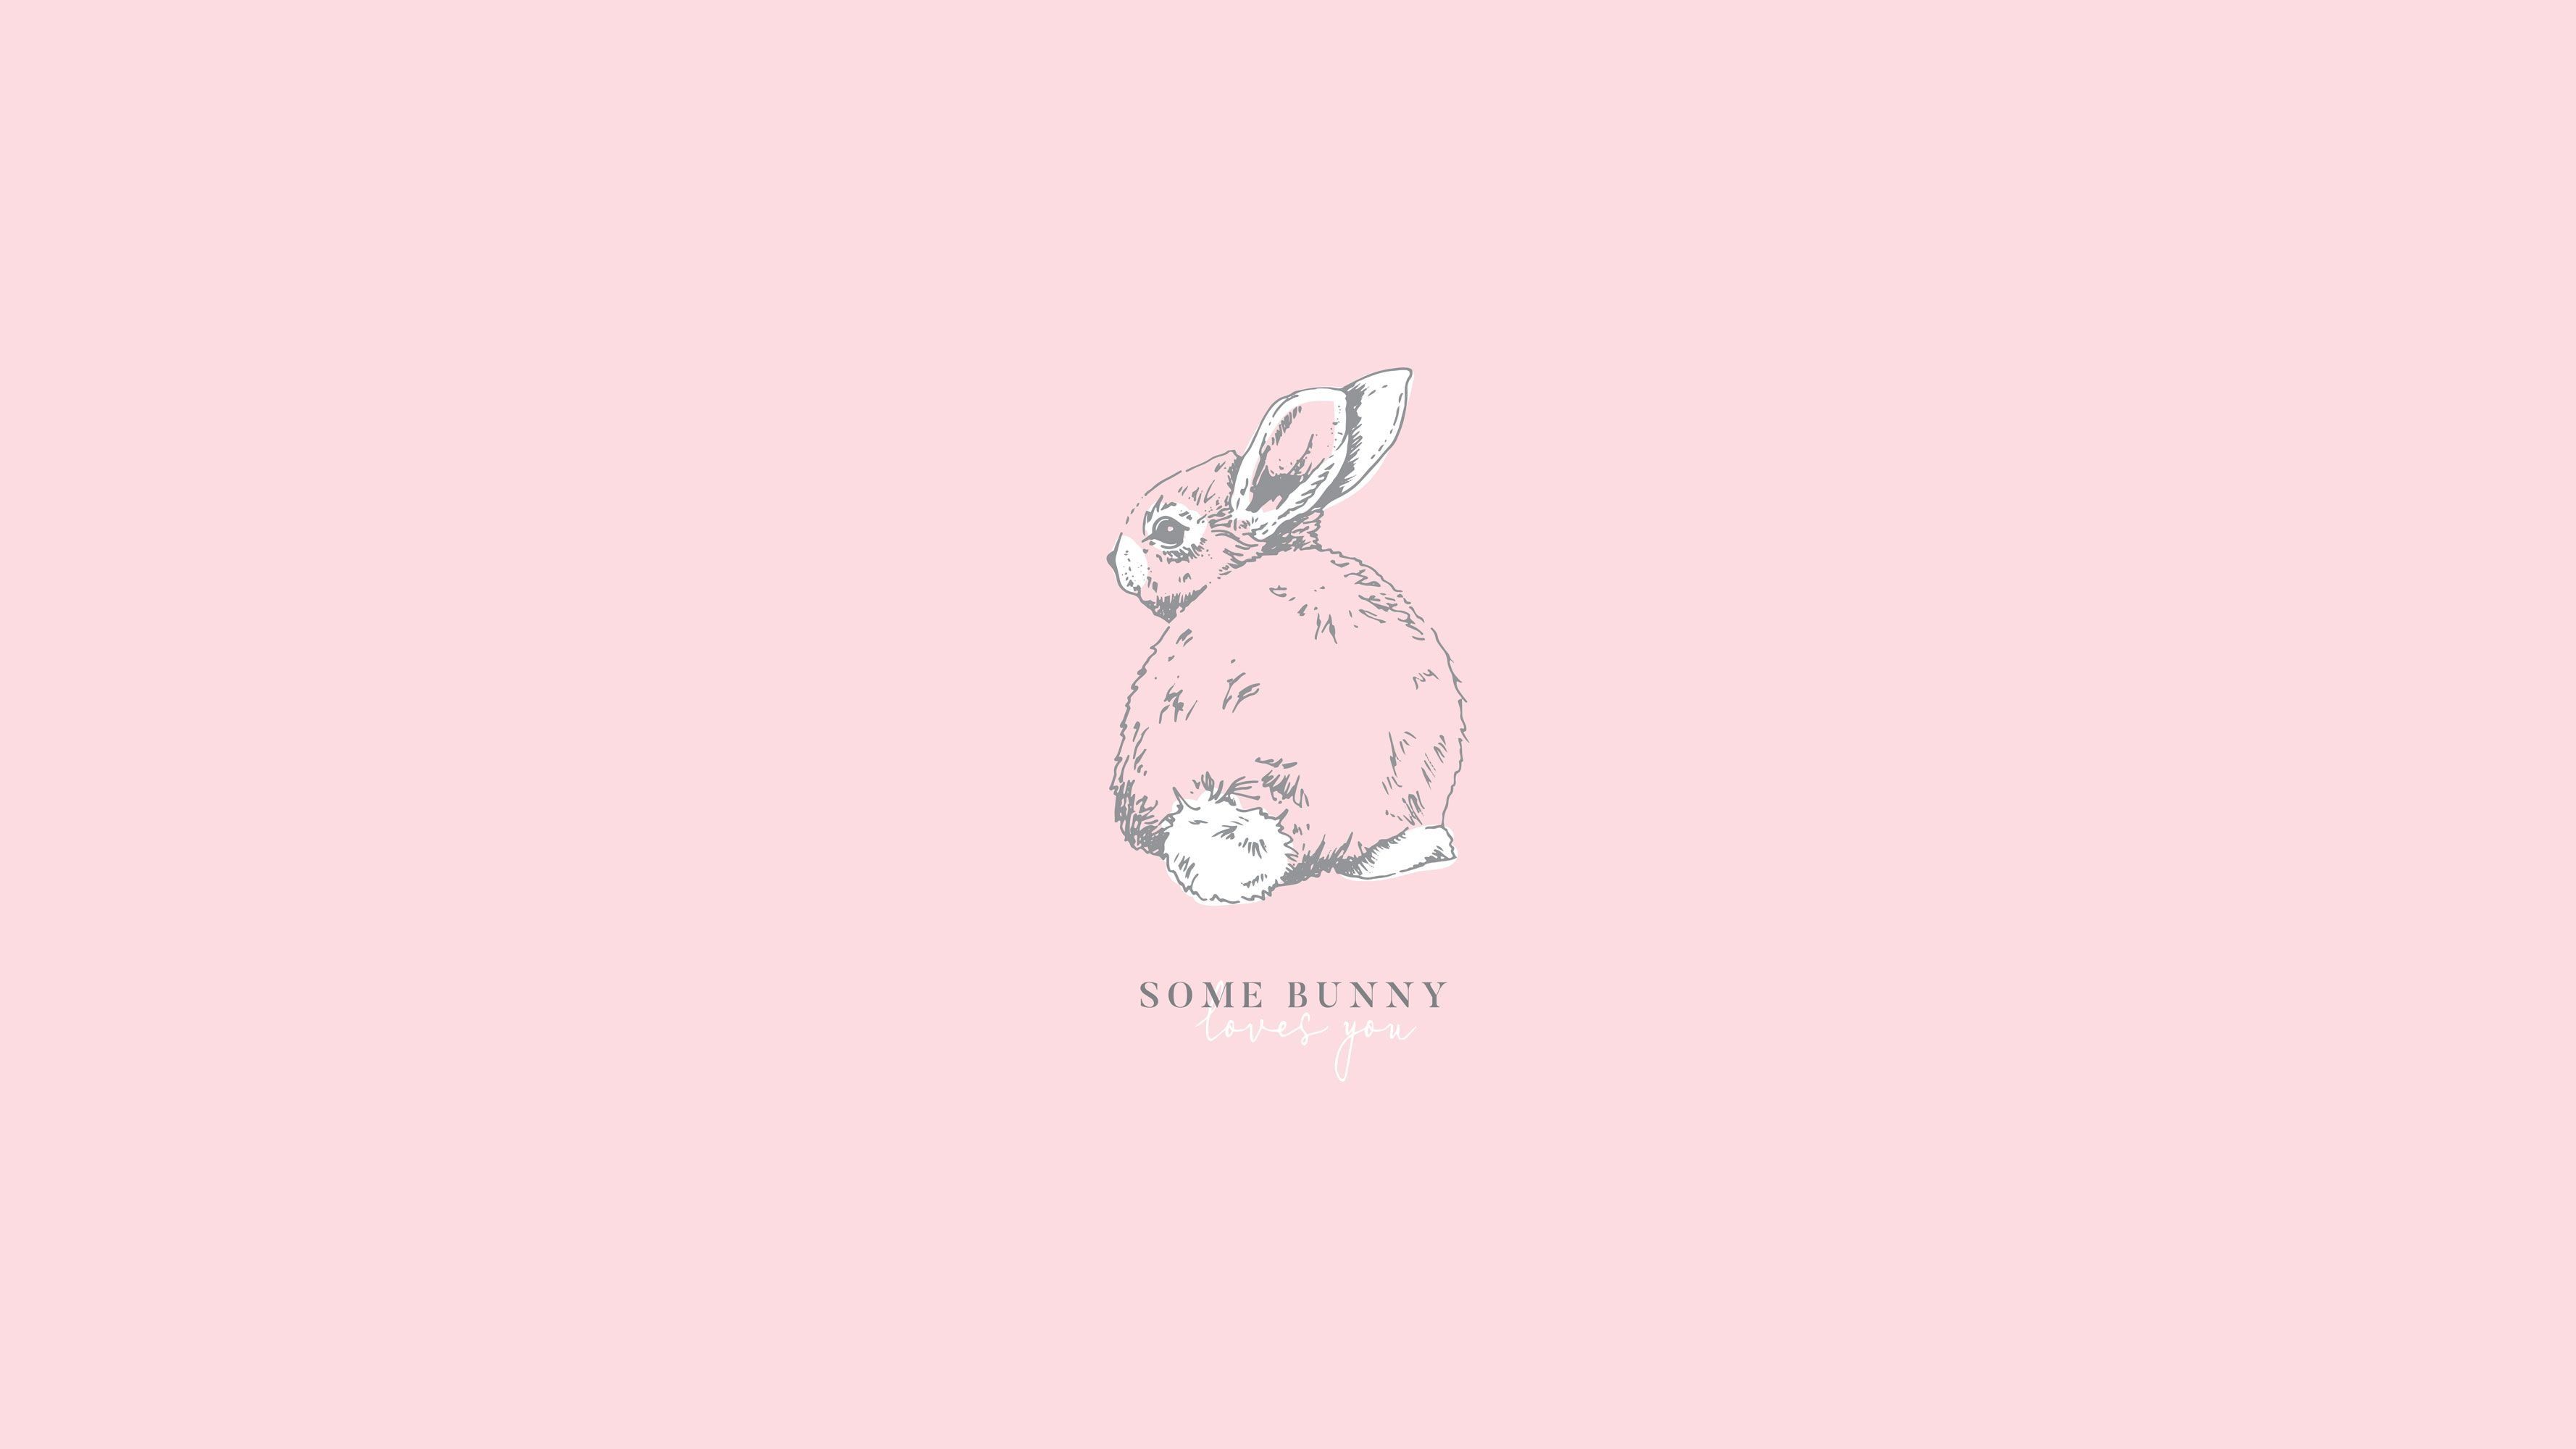 Some bunny loves you wallpaper - Pastel, cute